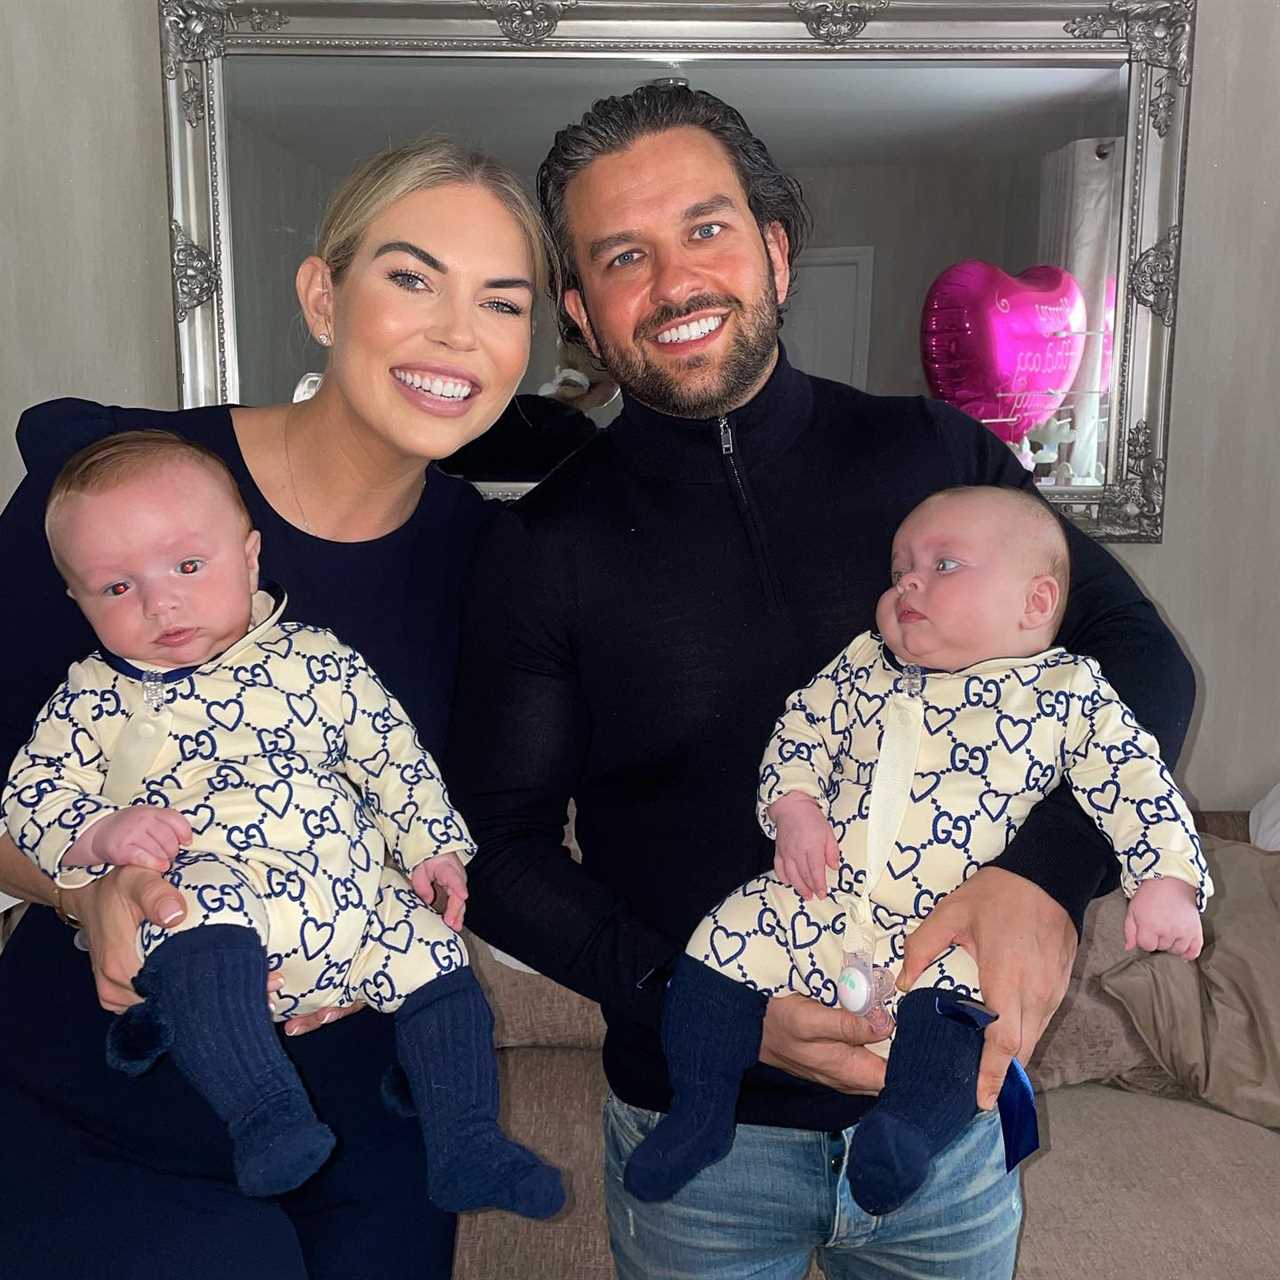 I’ll get stick for piercing my baby daughter’s ears but she looks lovely in diamond earrings, says Towie’s Frankie Essex